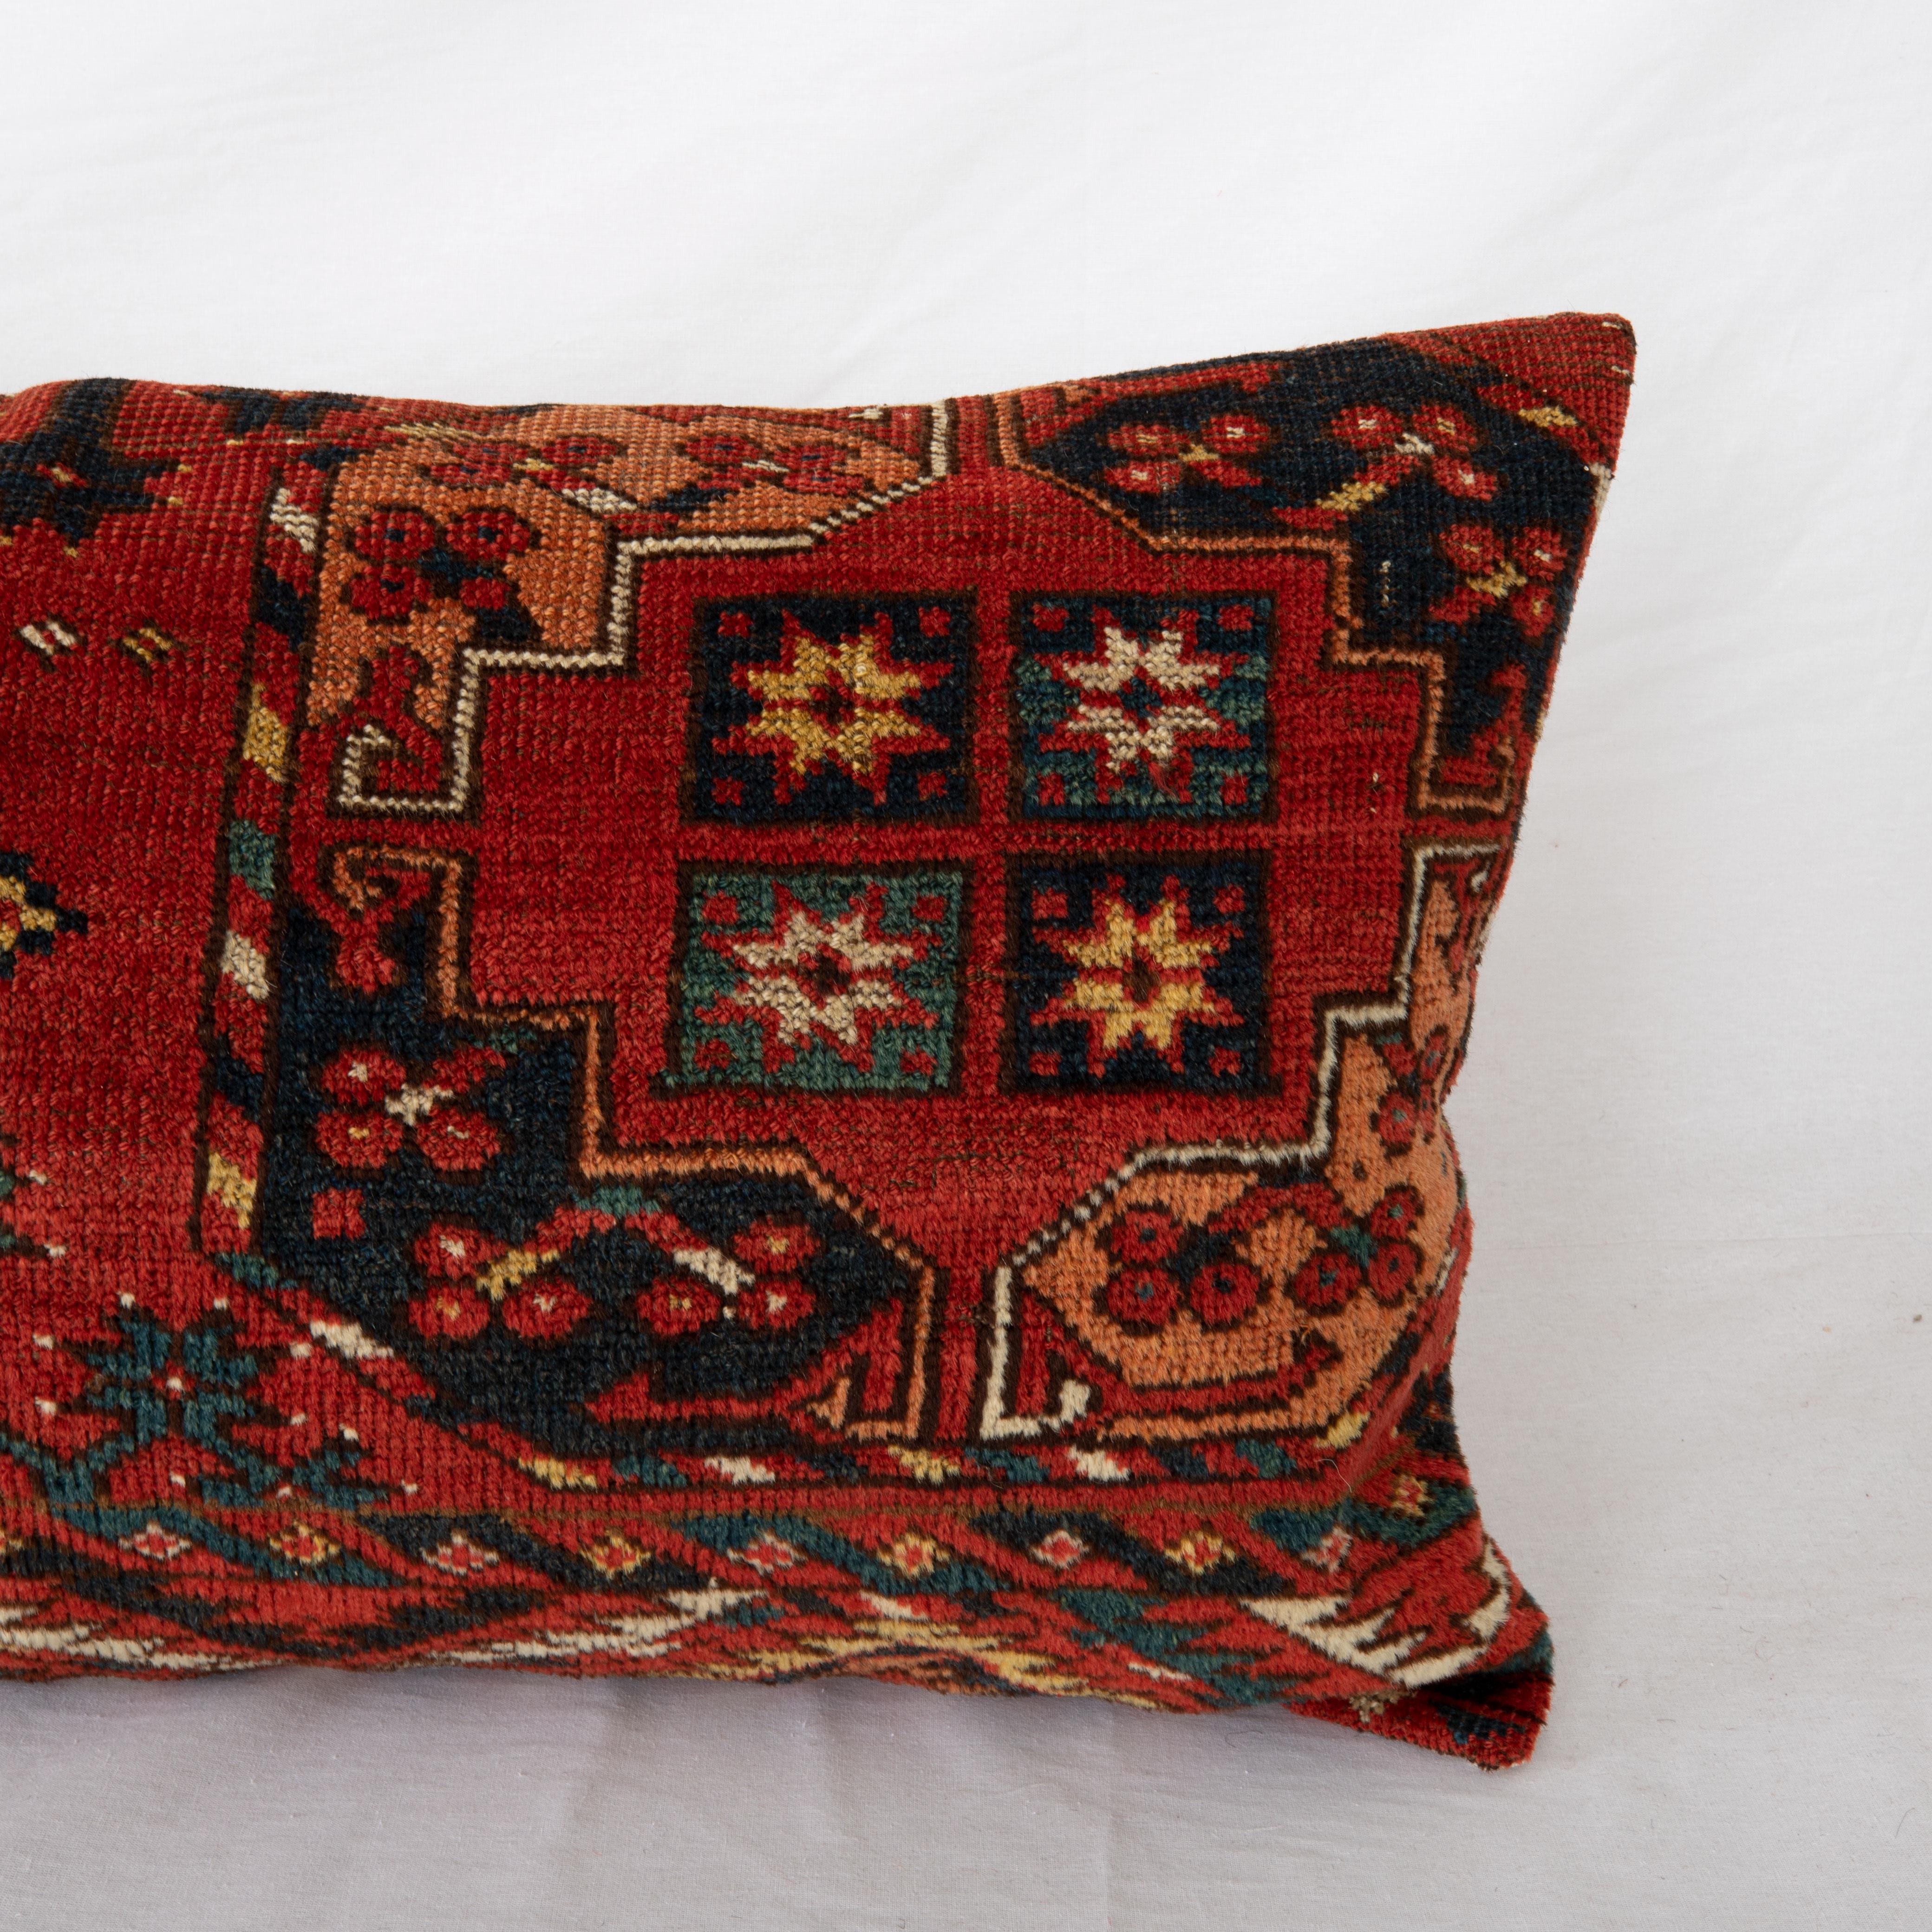 Hand-Woven Antique Rug Pillowcase Made from Mid-19th C. Turkmen Ersari Rug Fragment For Sale